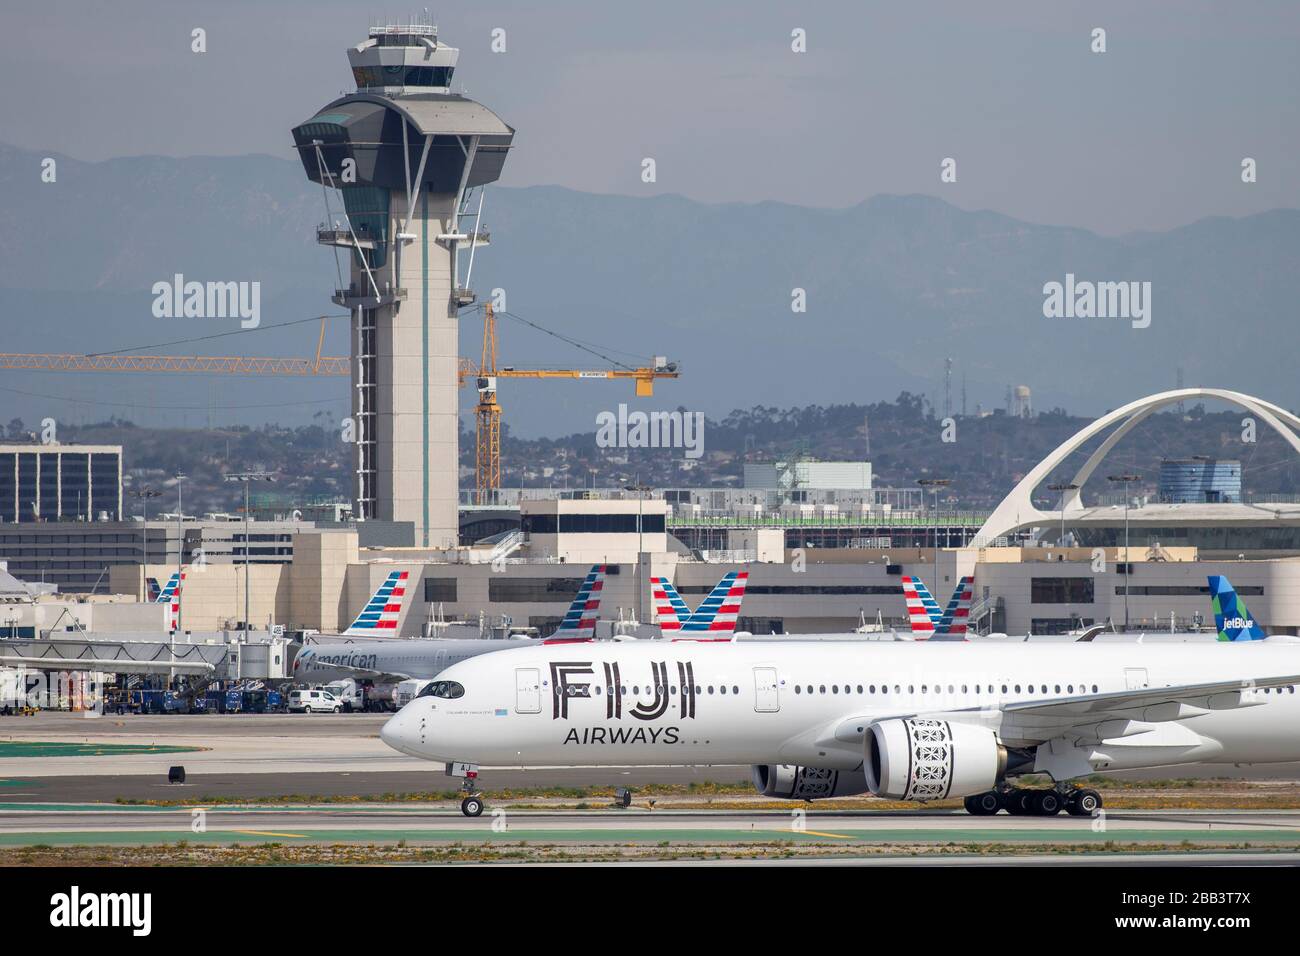 A Fiji Airways A350-900 taxis after landing at Los Angeles International Airport (LAX) on Saturday, February 29, 2020 in Los Angeles, California, USA. (Photo by IOS/Espa-Images) Stock Photo